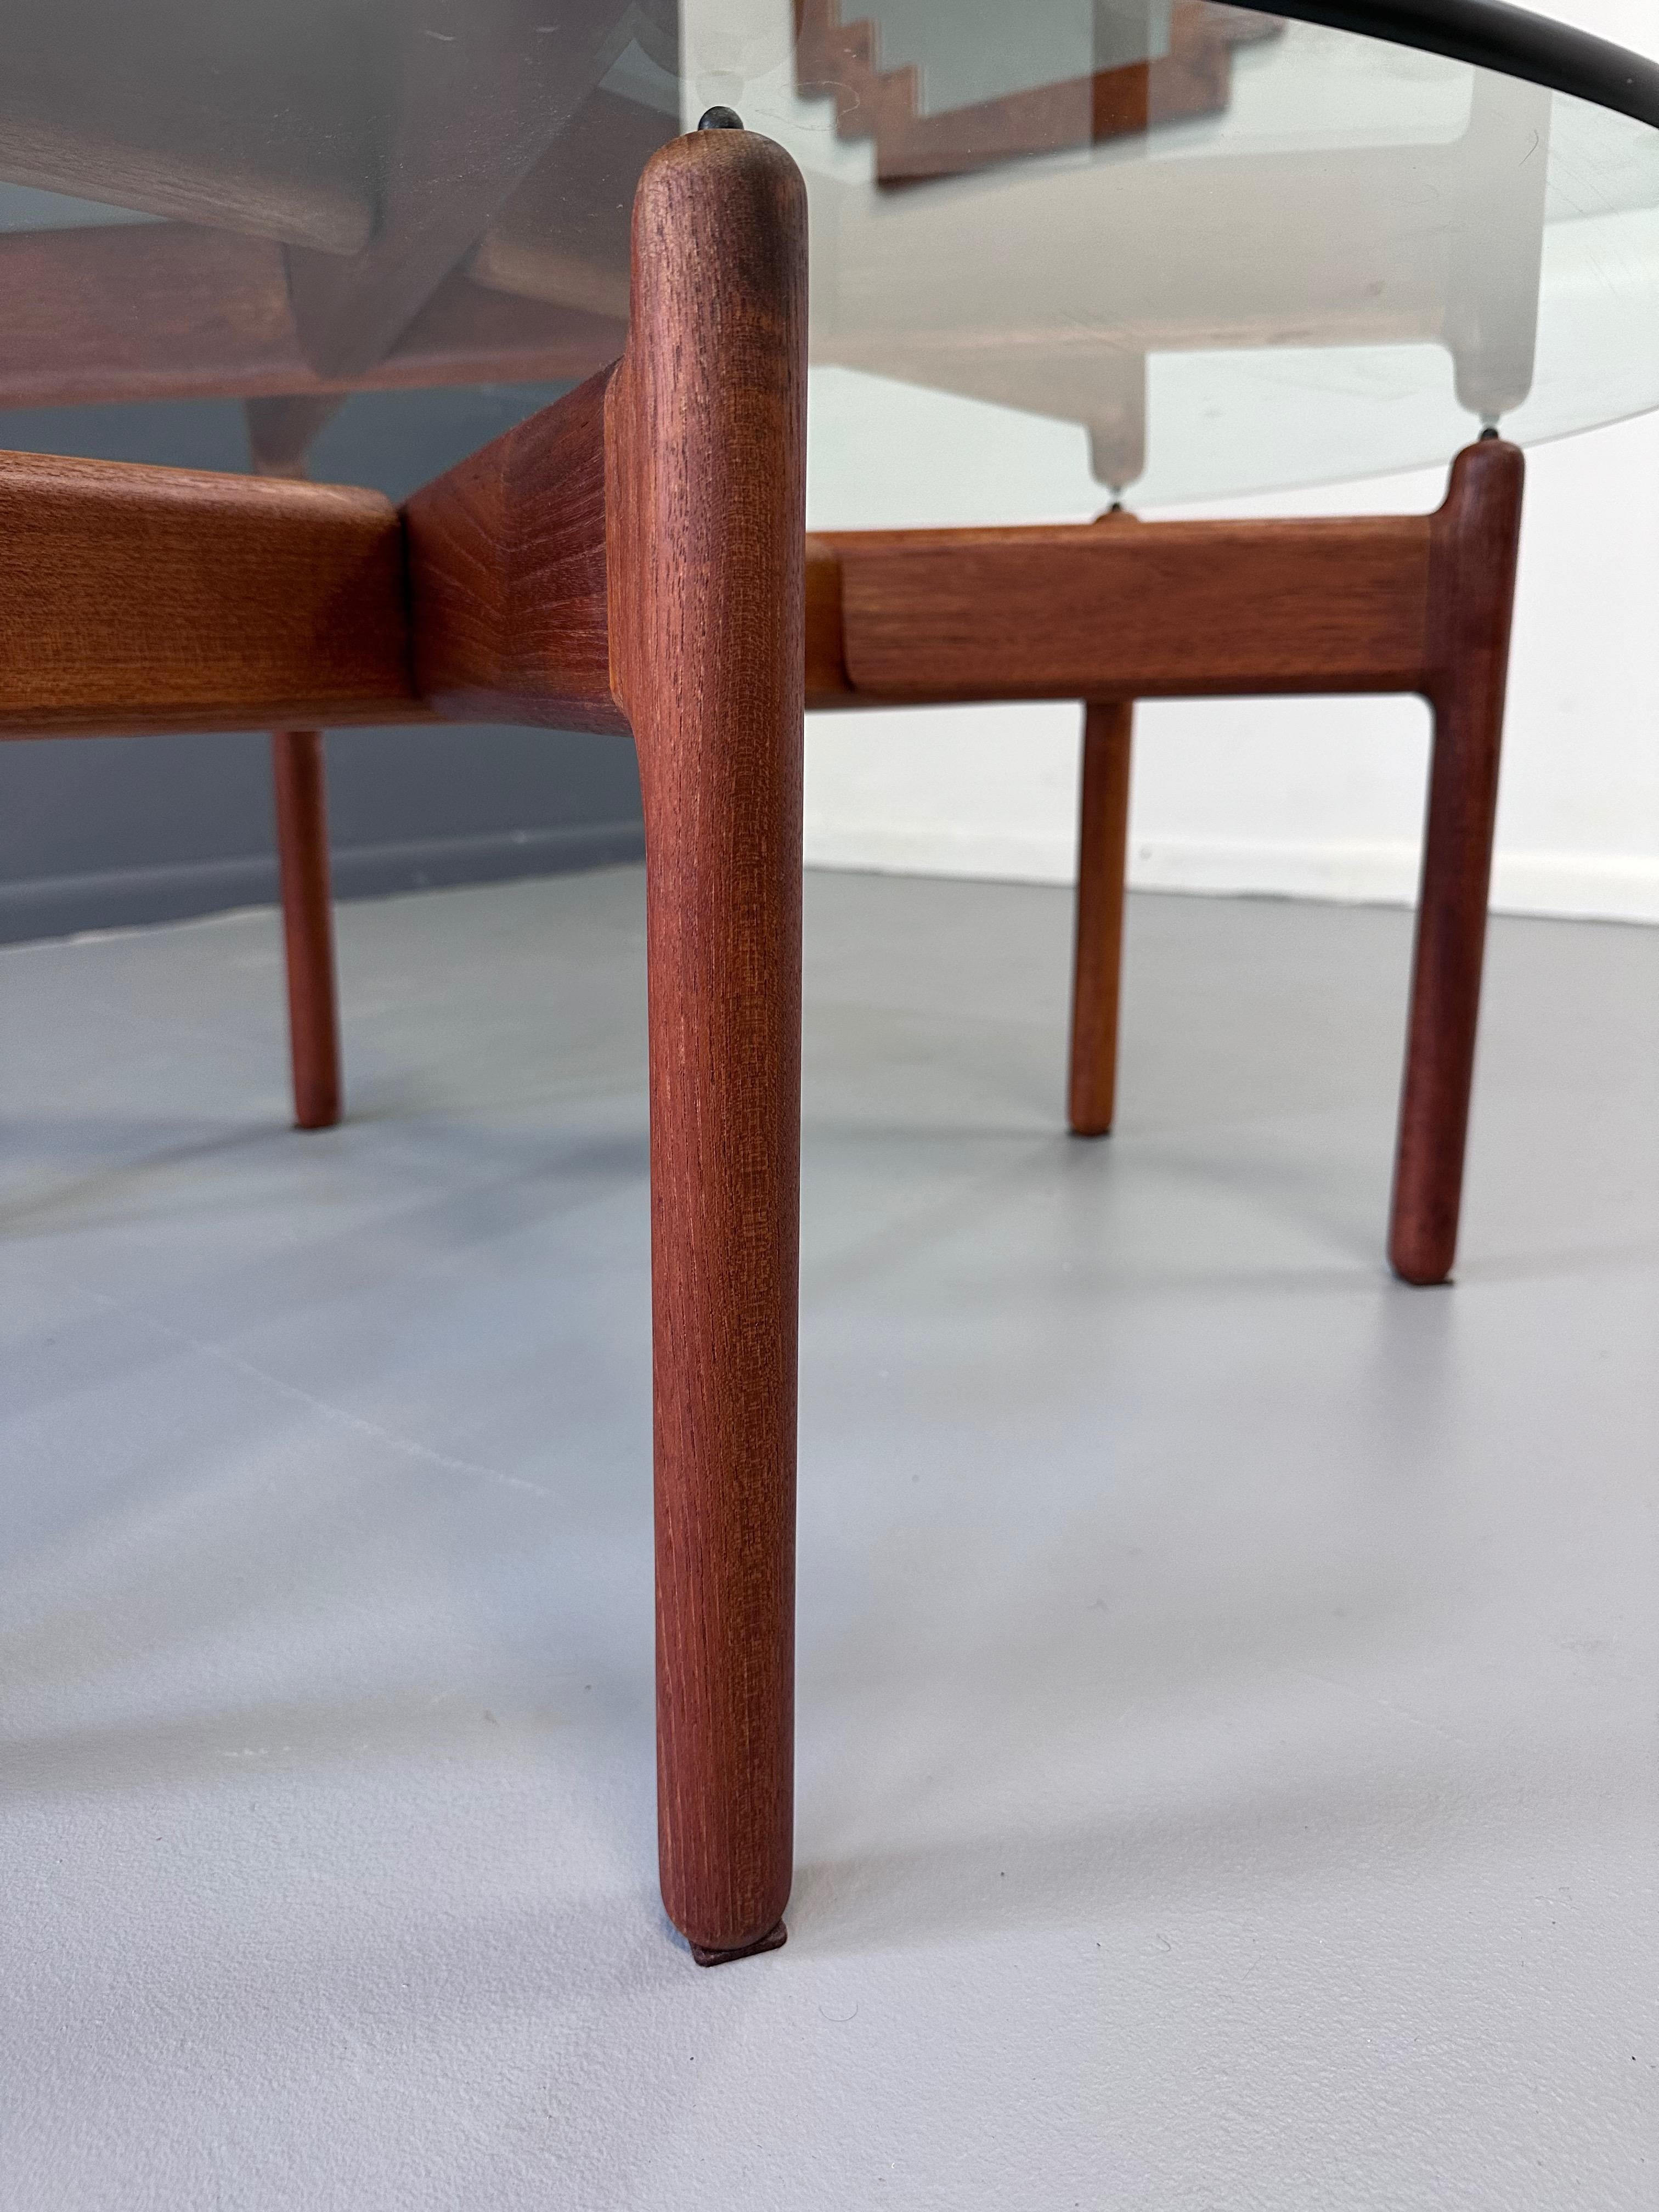 Niels Bach Coffee/Cocktail Table in Teak Denmark 1960 Midcentury For Sale 3